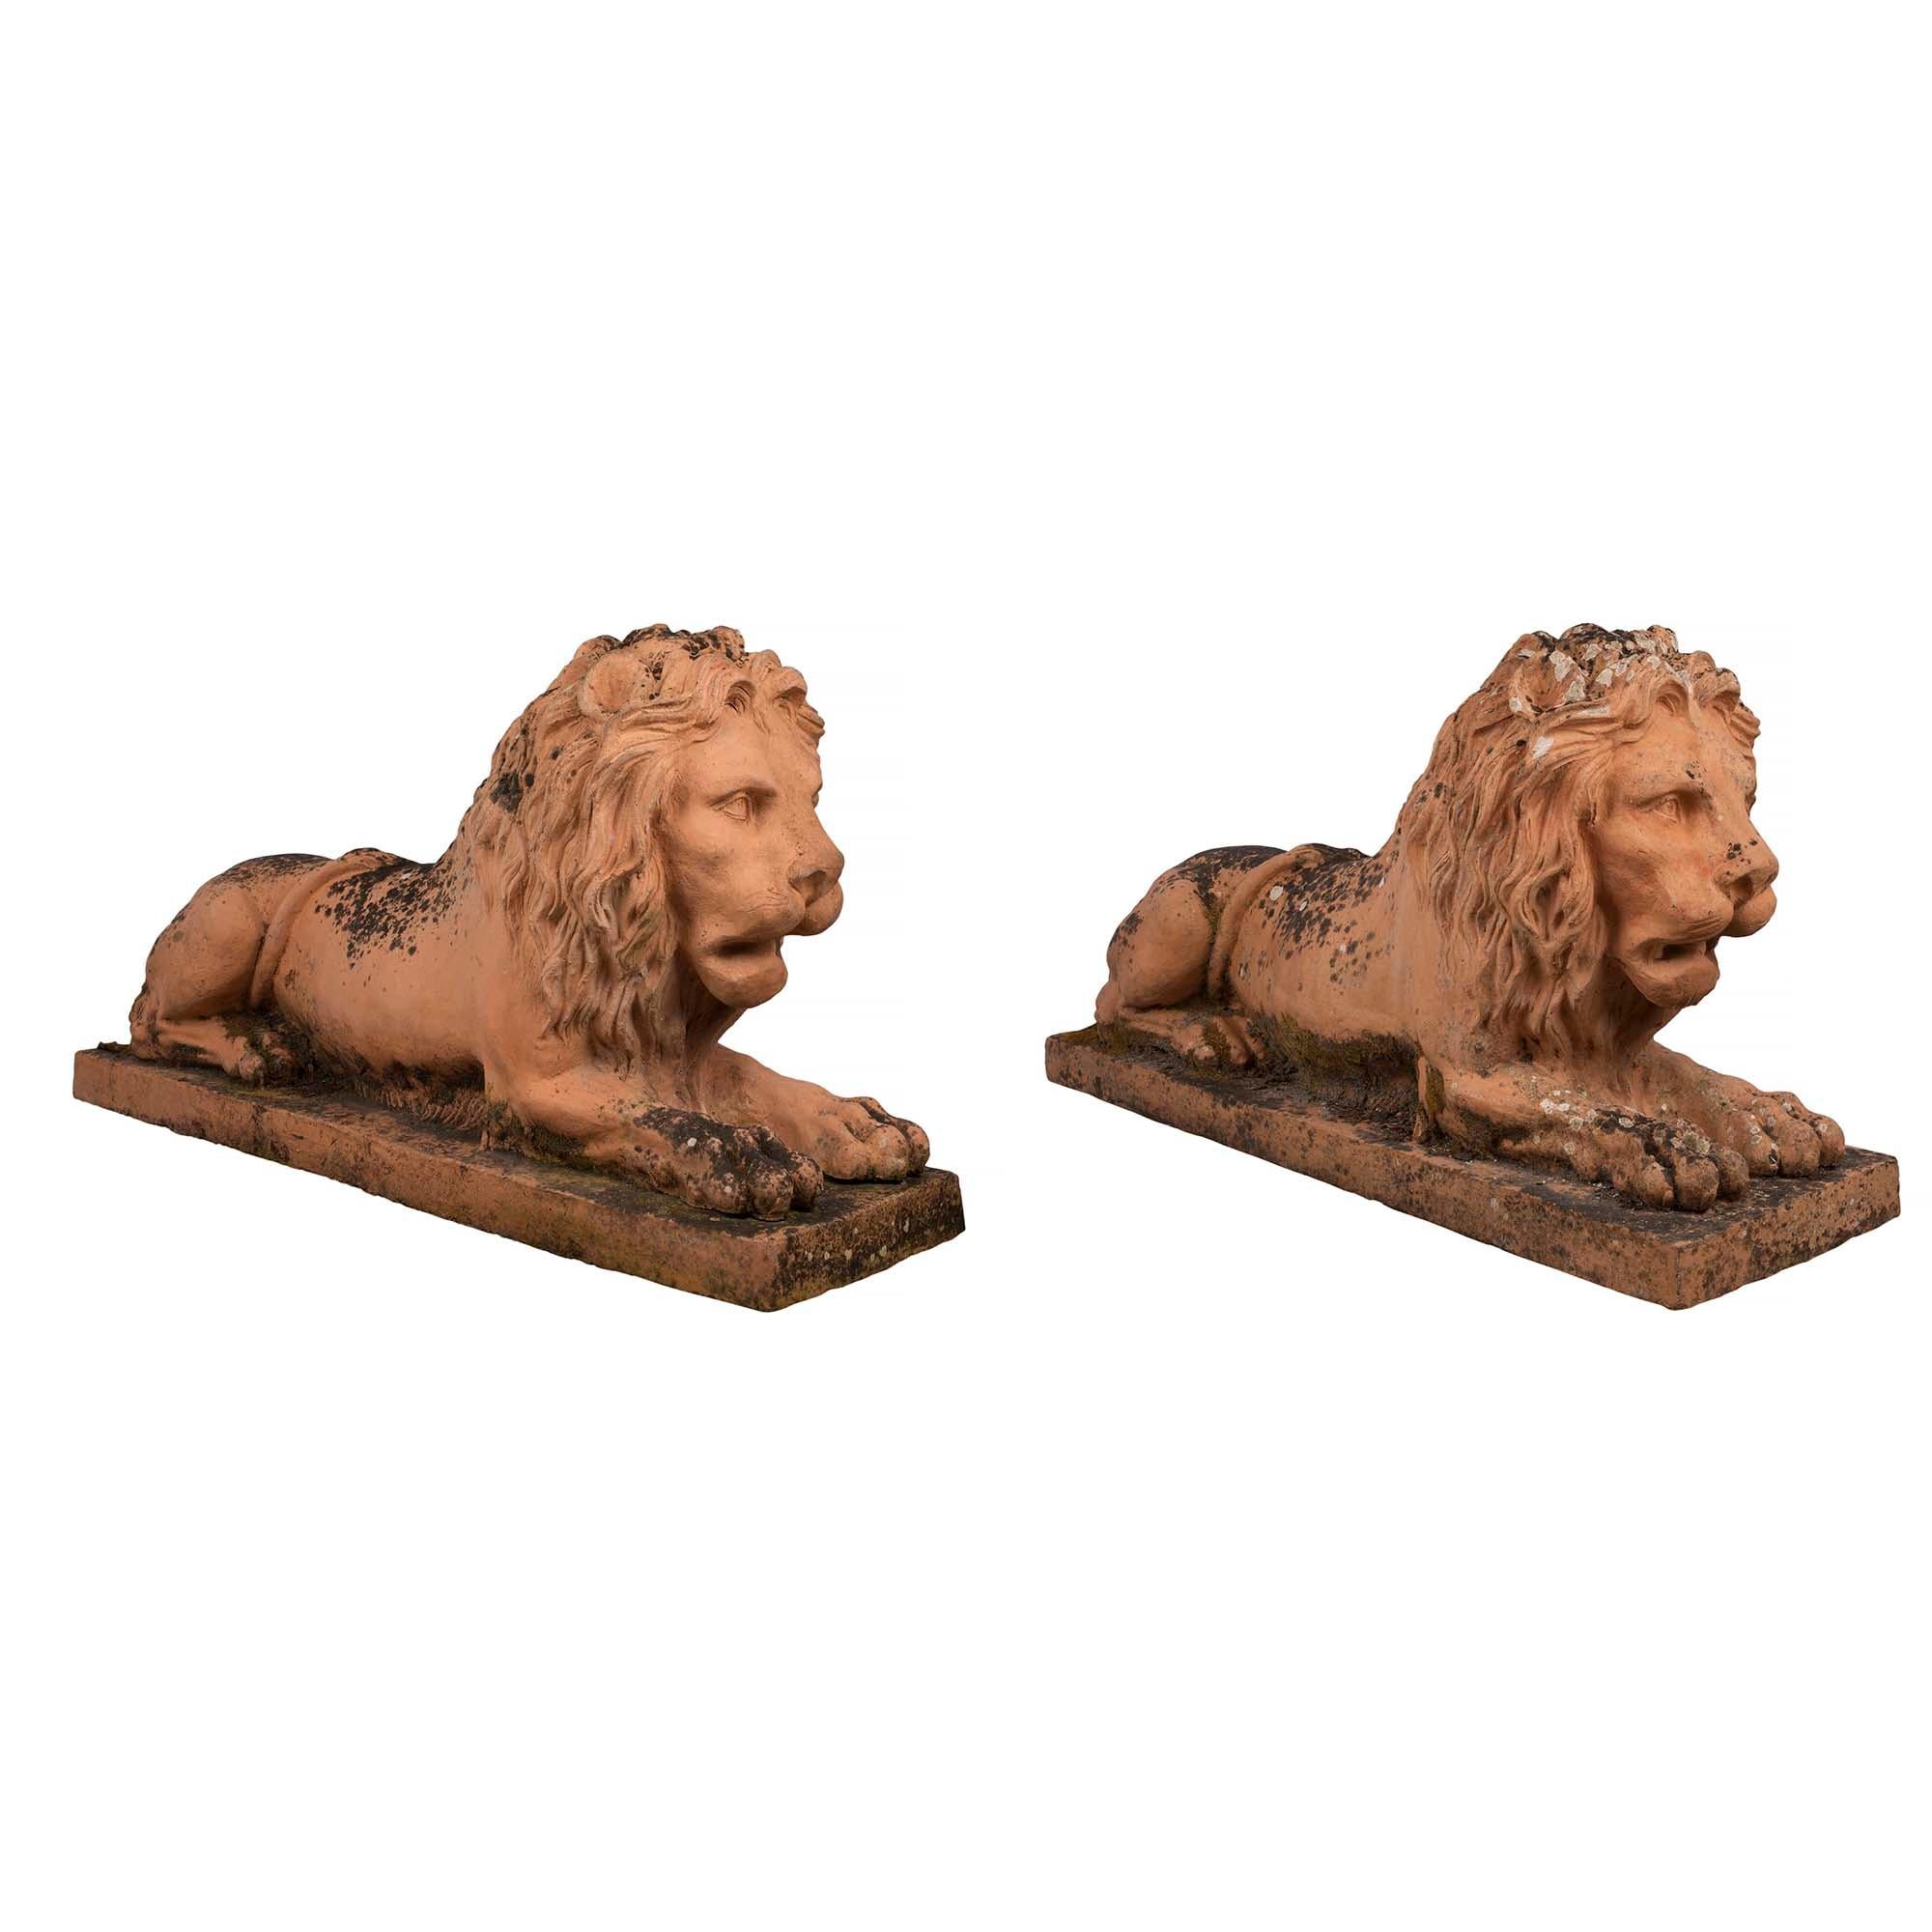 A sensational pair of Italian mid 19th century, circa 1850, terra cotta lions. Each lions is raised on a rectangular base. The lions with expressive faces and wonderfully carved manes, are sitting on their front paws. Outstanding patina throughout